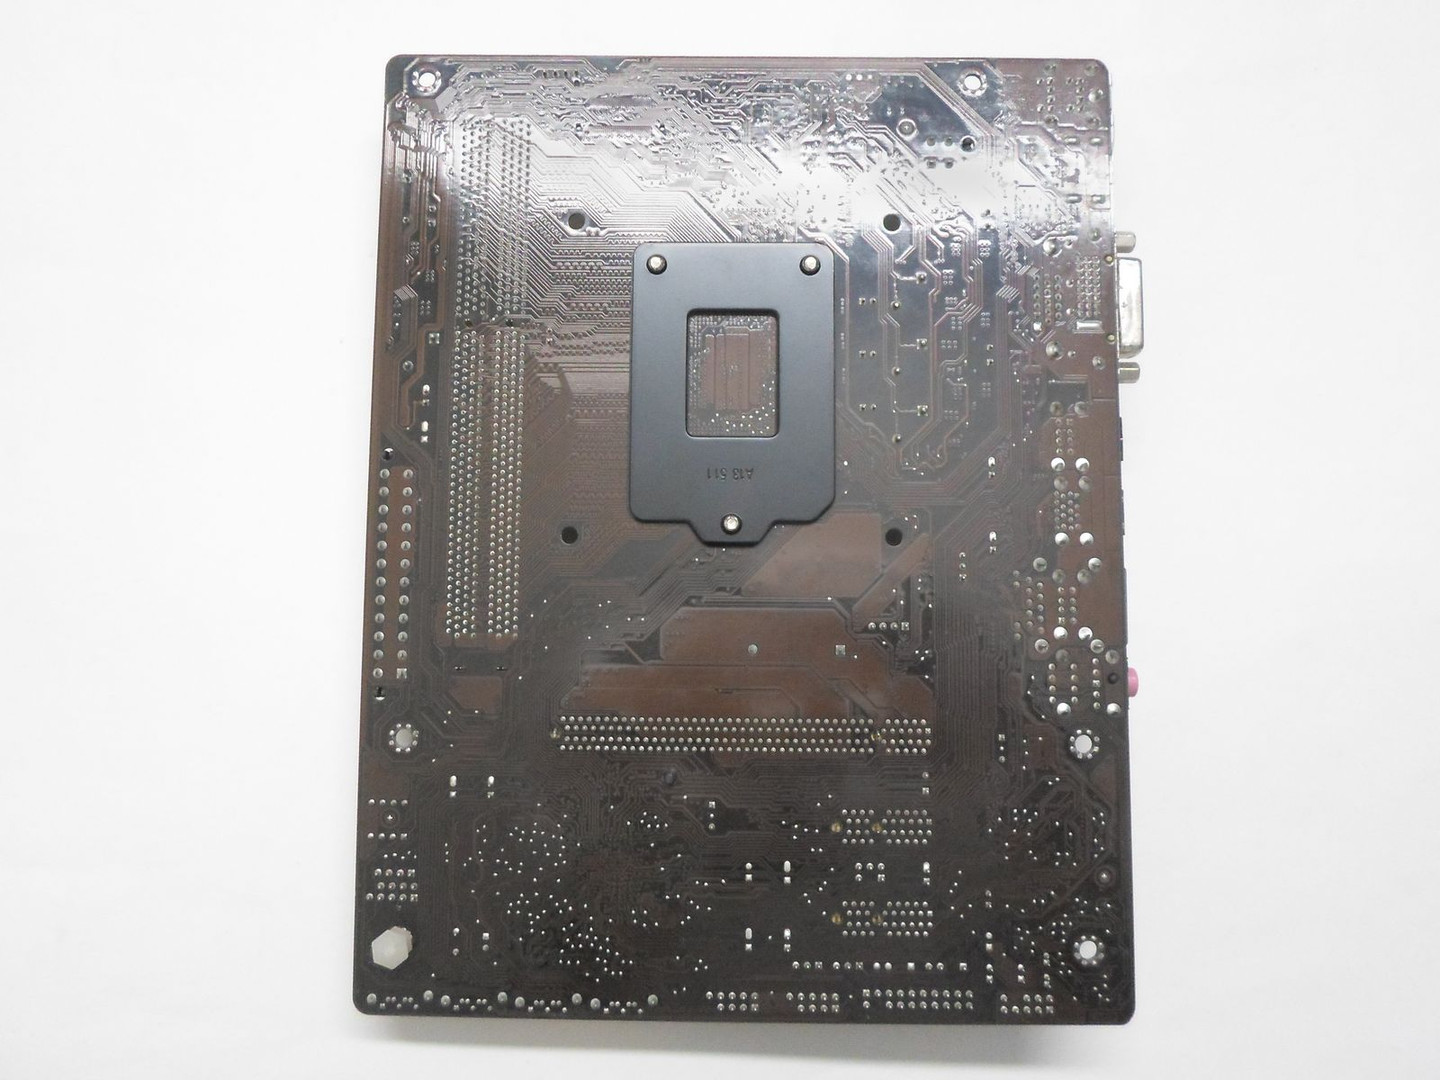 accesorios para electronica - Motherboard ASUS H81M-A DDR3 Socket 1150 2